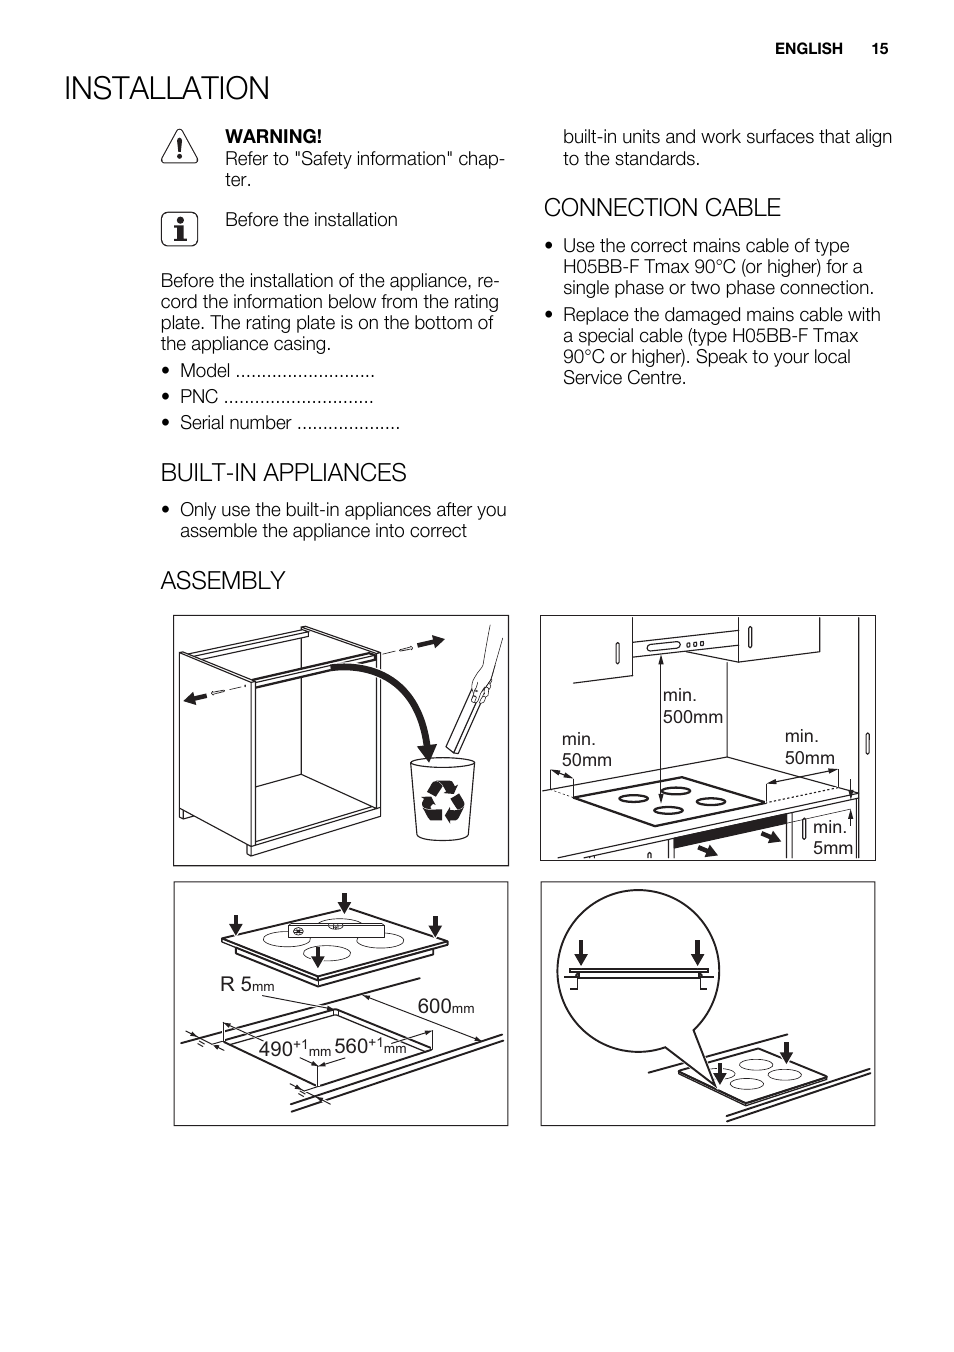 Installation, Built-in appliances, Connection cable | Electrolux EHH6540FOK  User Manual | Page 15 / 20